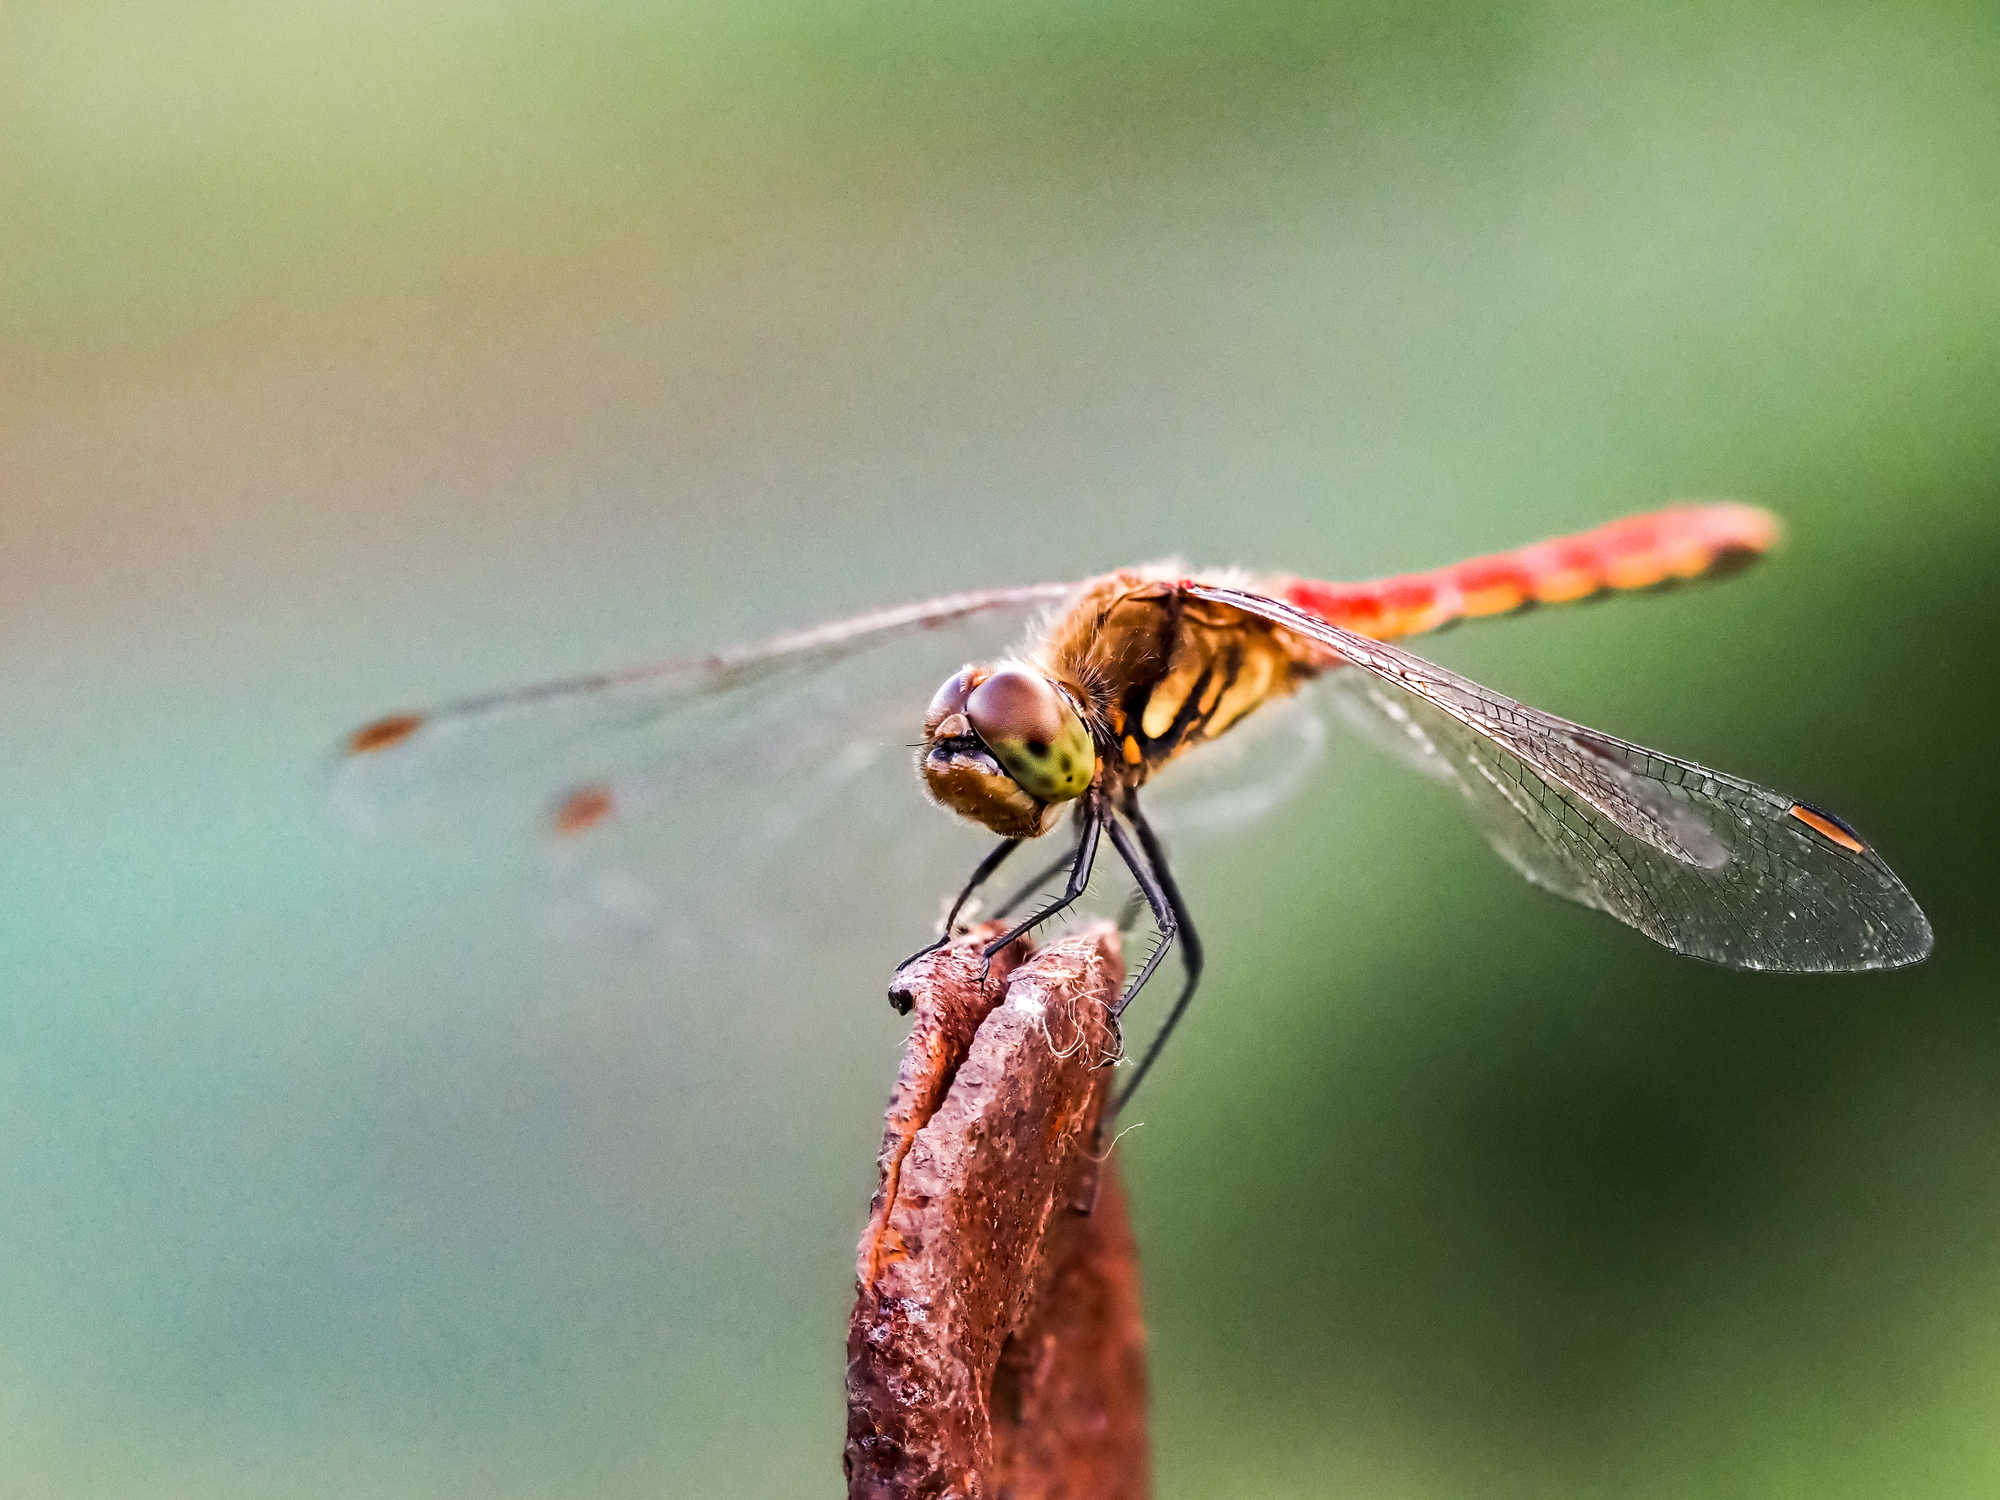 A red dragonfly sits still on top of a rusty metal tip